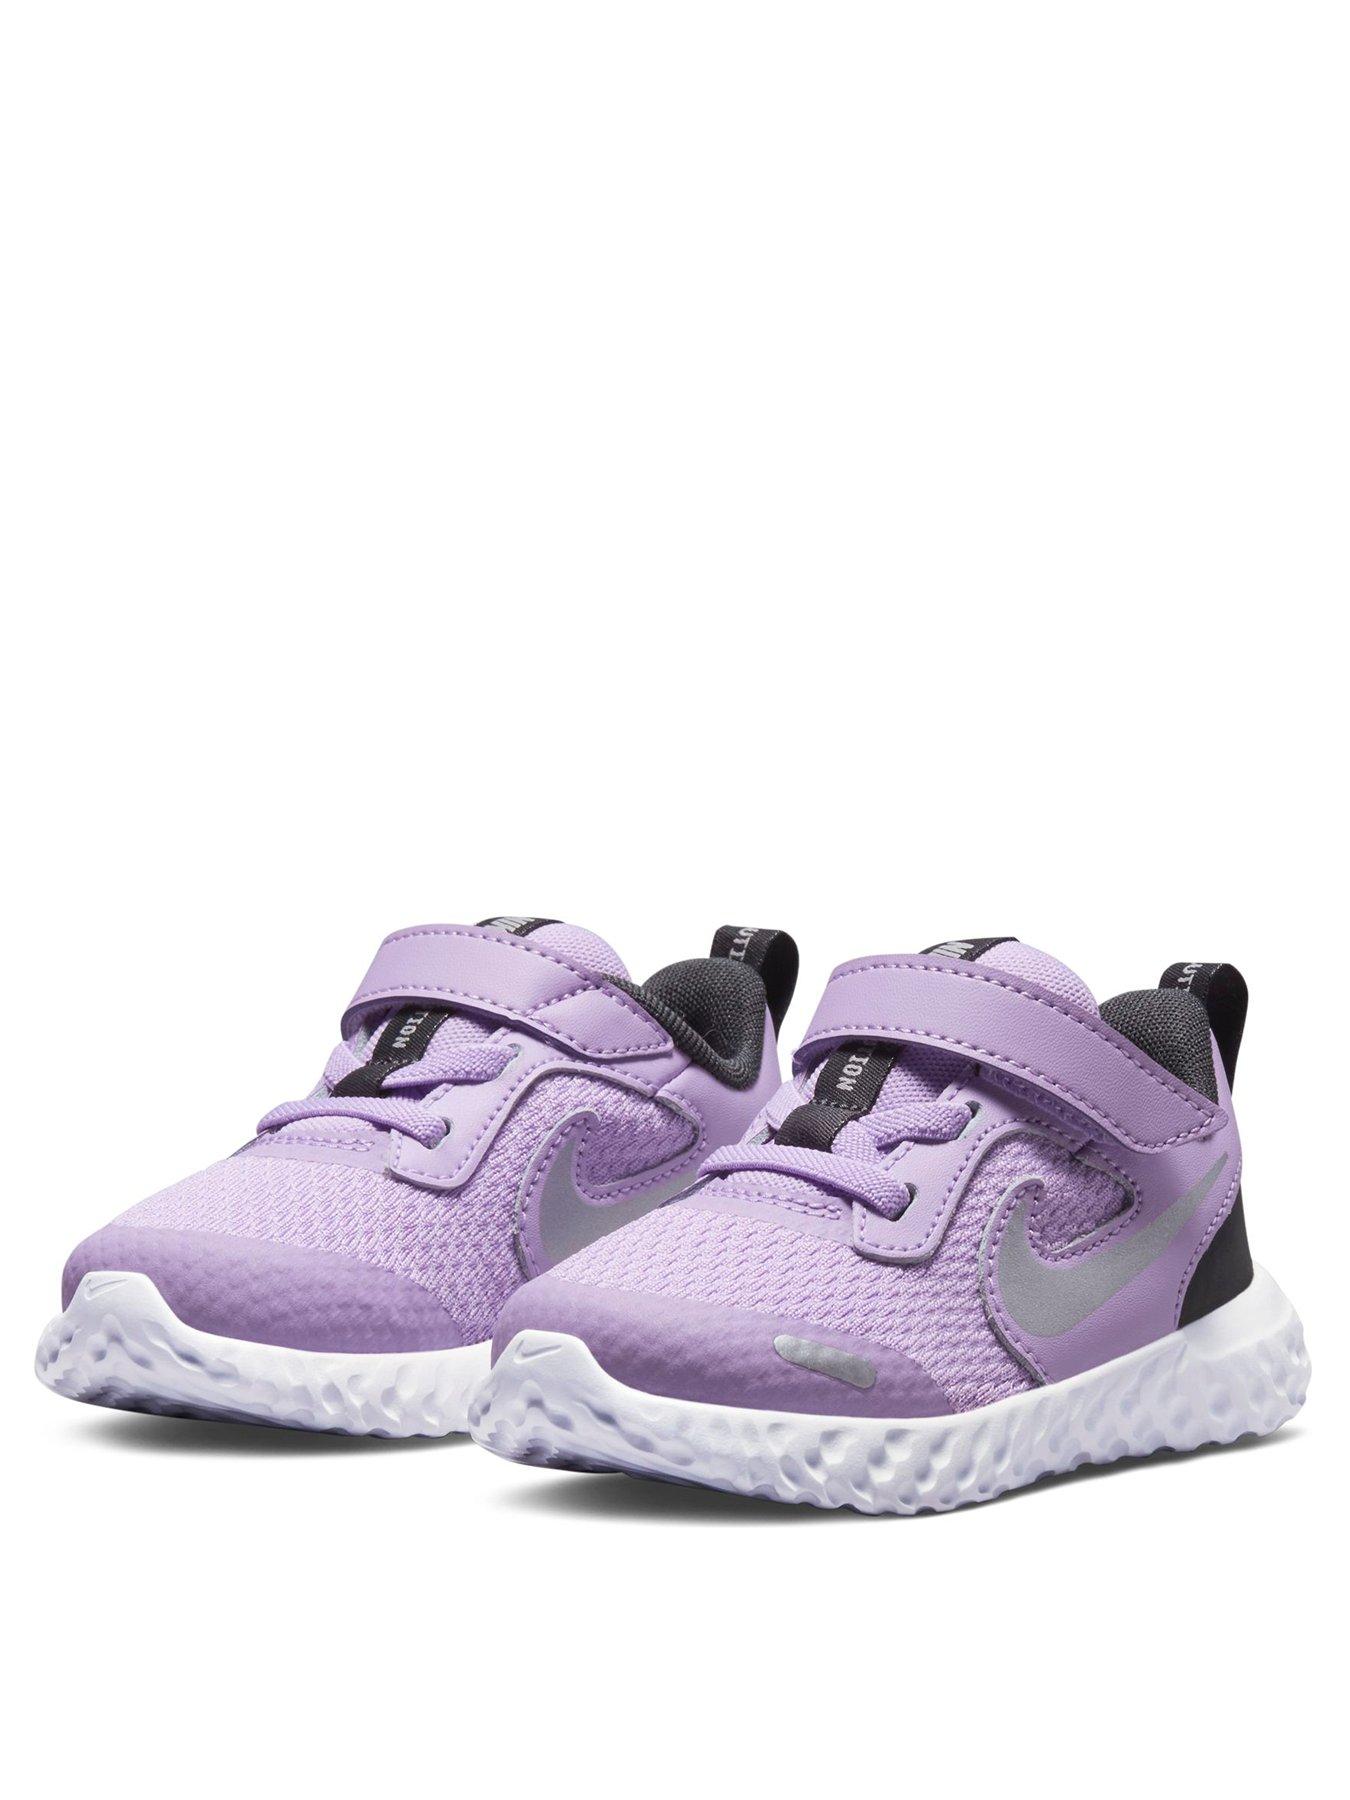 Trainers Revolution 5 Infant Trainer - Lilac